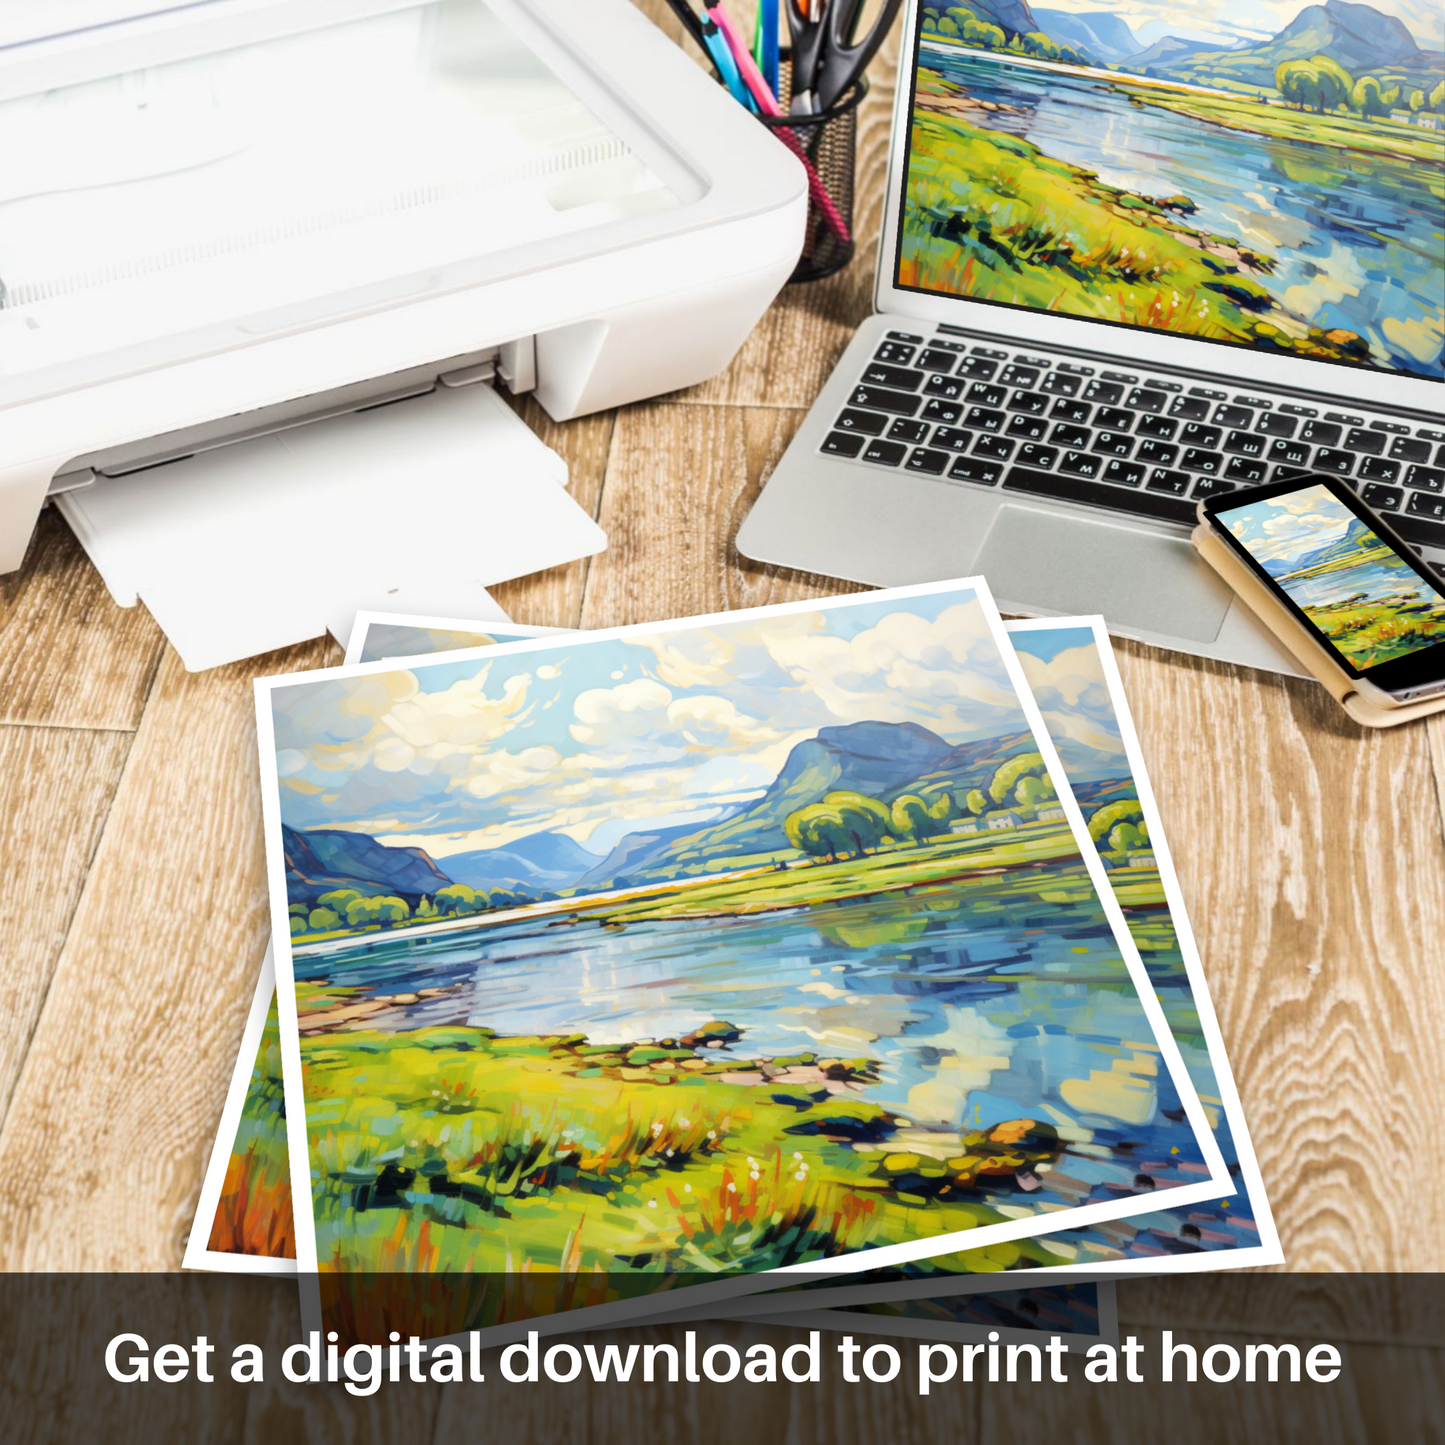 Downloadable and printable picture of Loch Leven, Perth and Kinross in summer